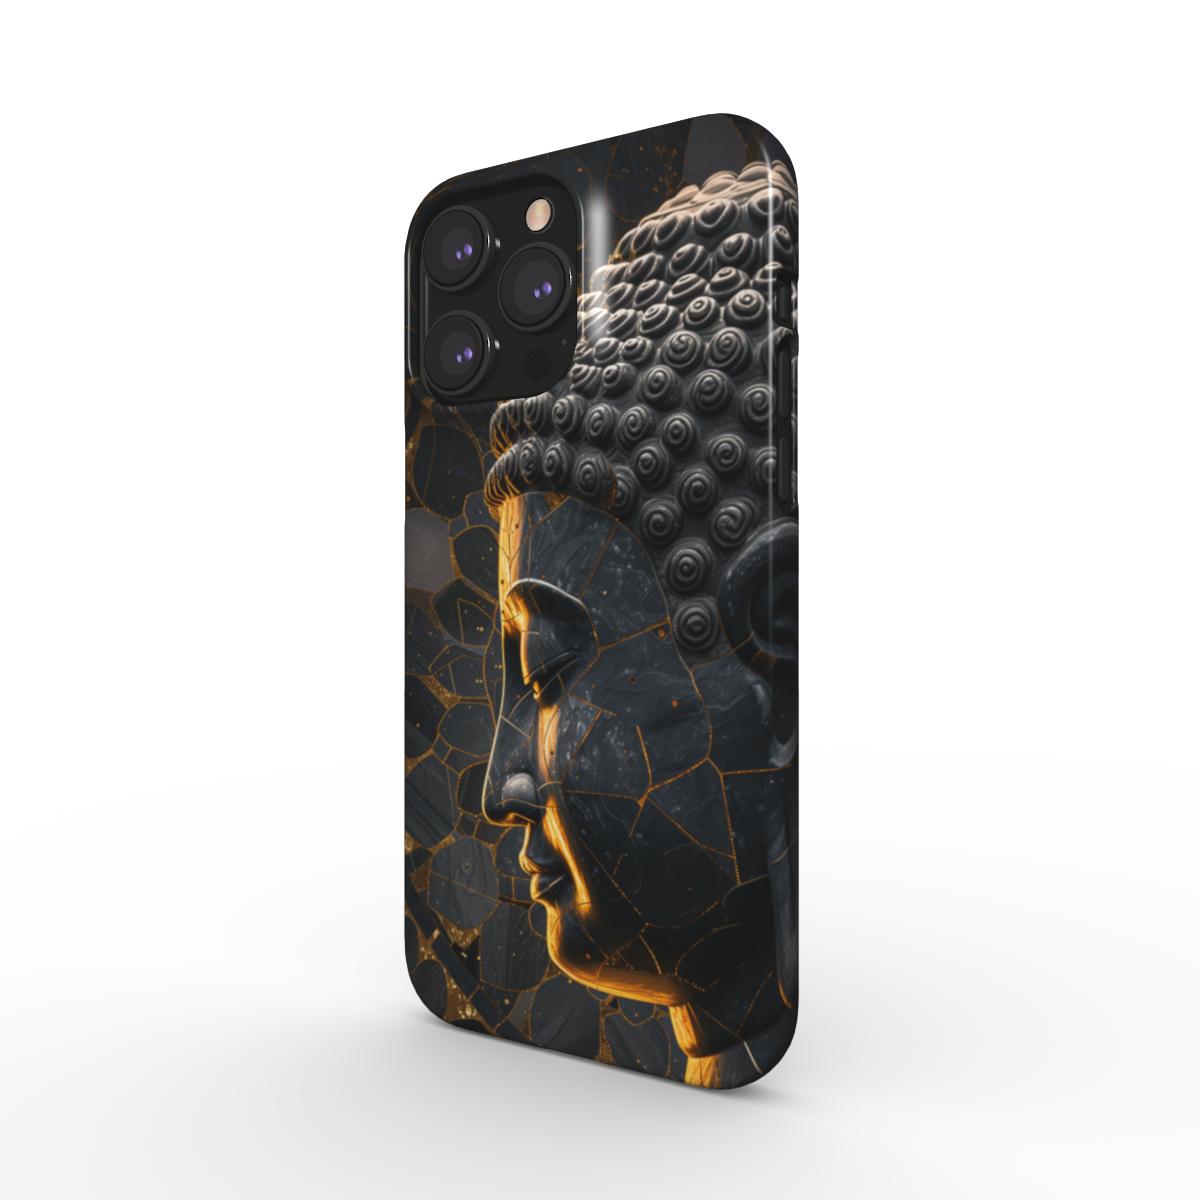 Elevate your phone’s look with the Buddha Mosaic Art Snap Case